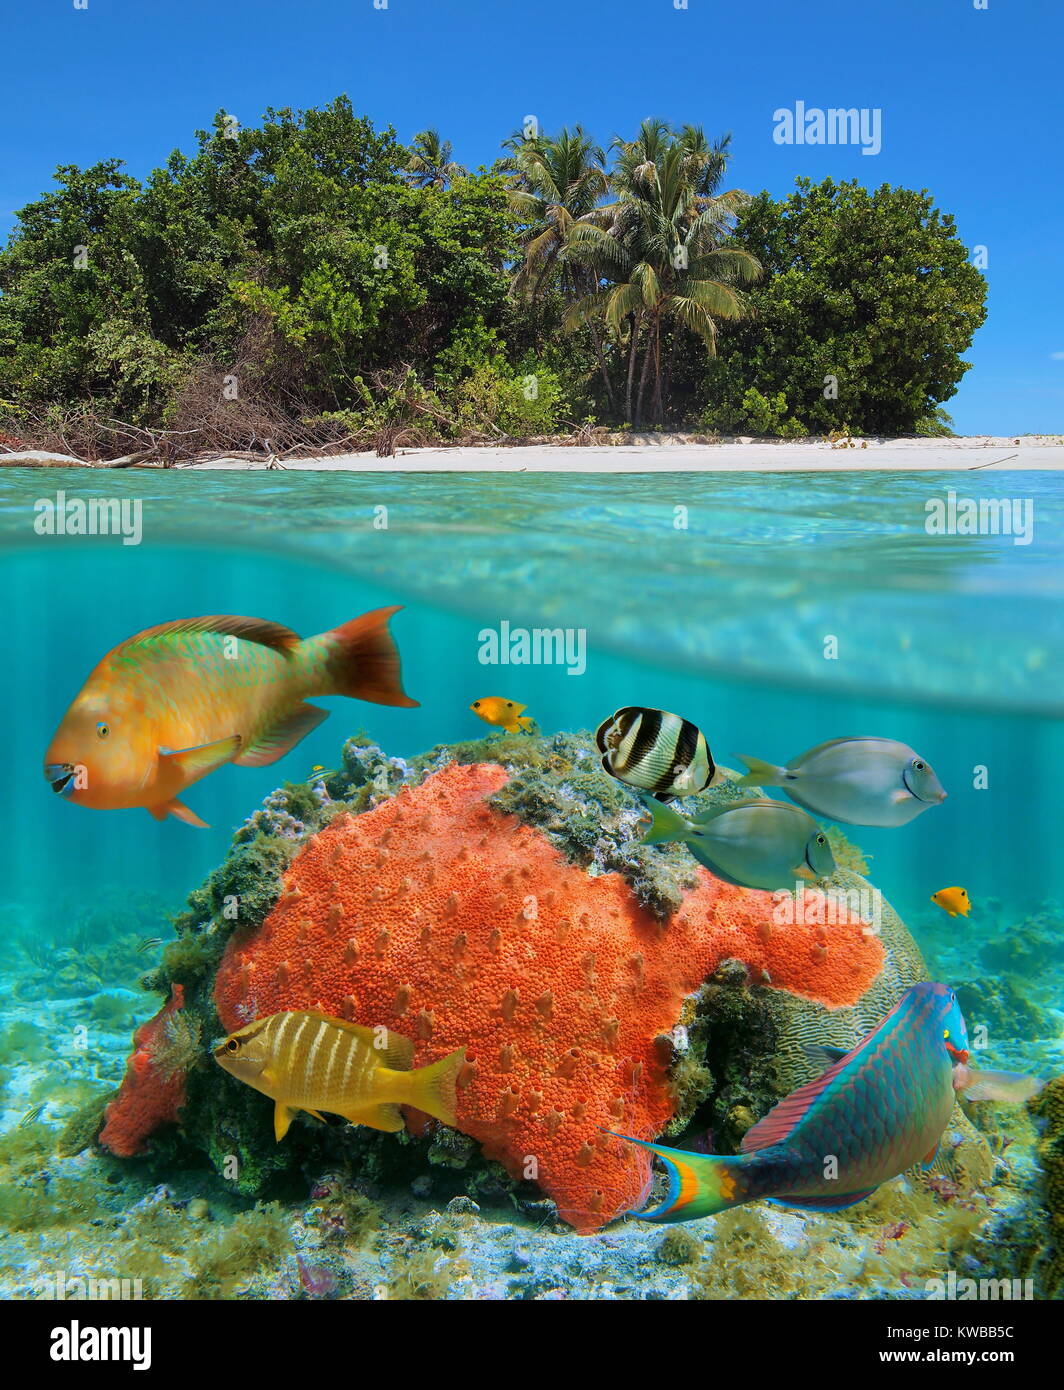 Split view over and under the water near a tropical beach shore with colorful fish and a red encrusting sponge underwater, Caribbean sea Stock Photo